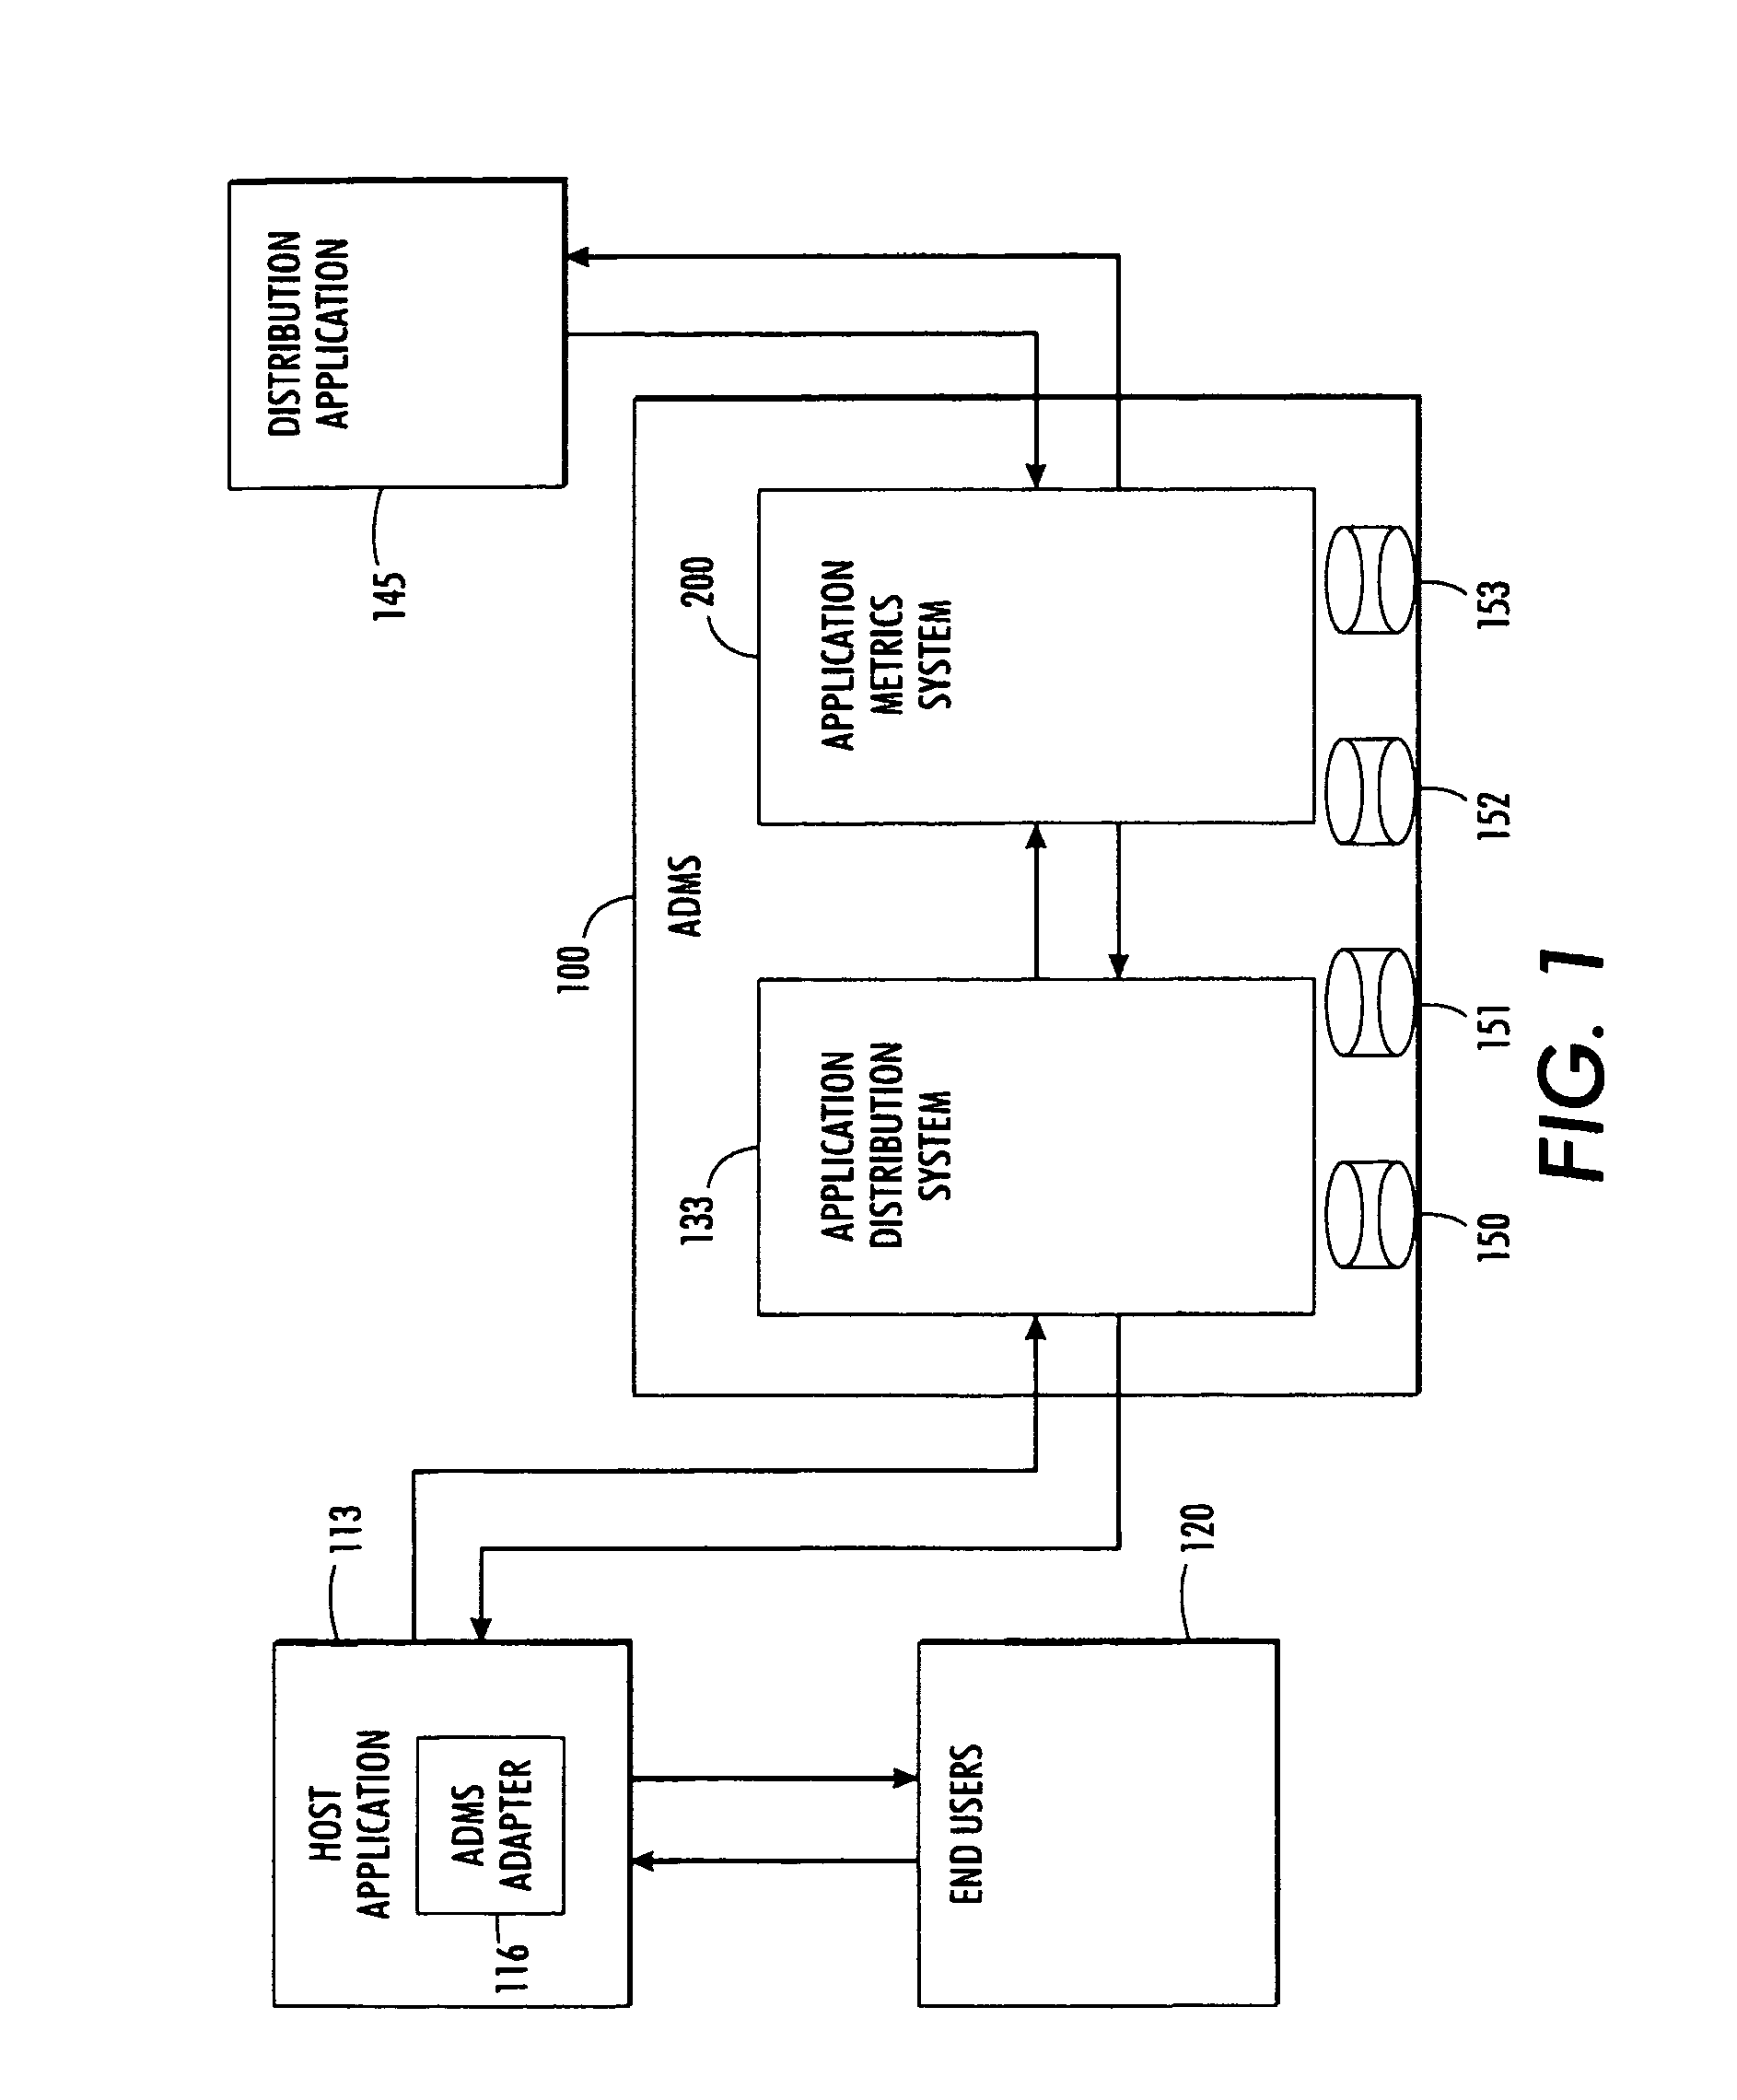 System and method for an application distribution and metrics system enabling the integration of distrubuted applications into host applications and the monetizing of distributed applications